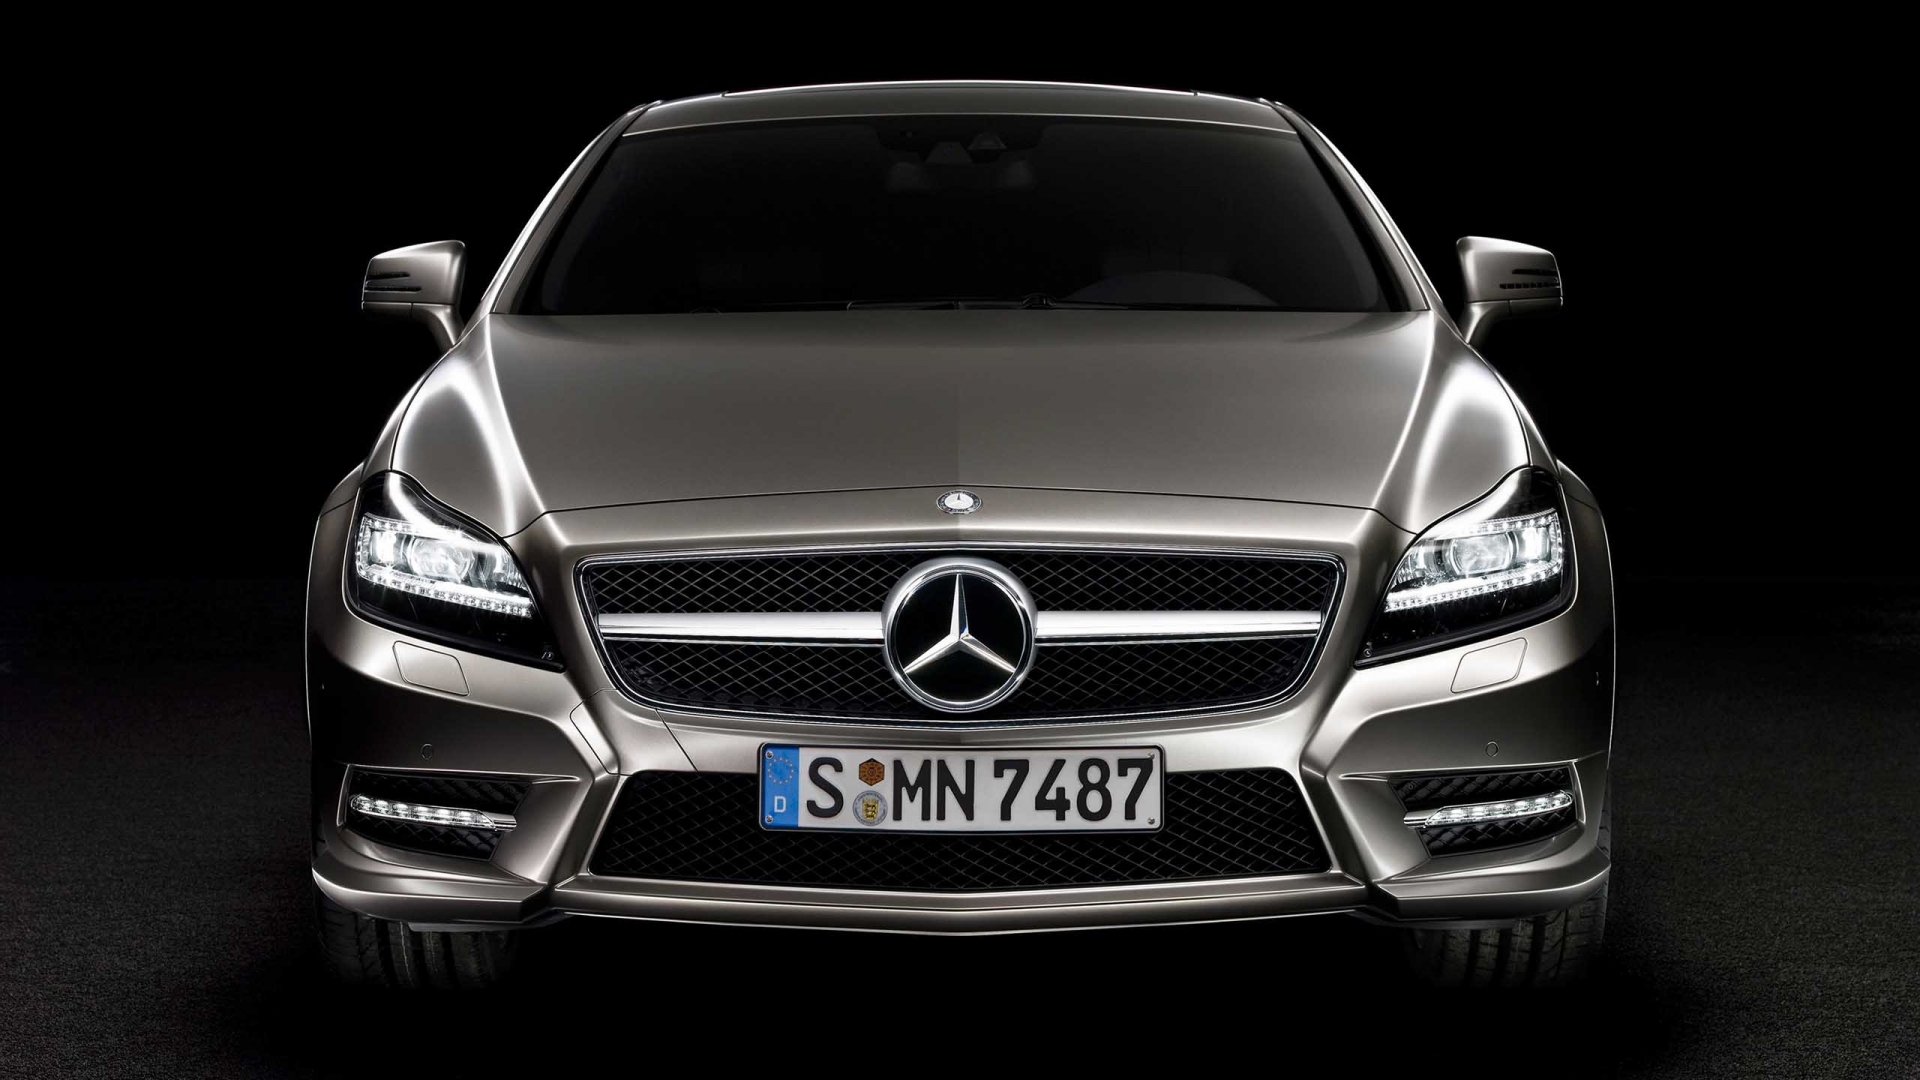 2012 Mercedes Benz CLS Front for 1920 x 1080 HDTV 1080p resolution